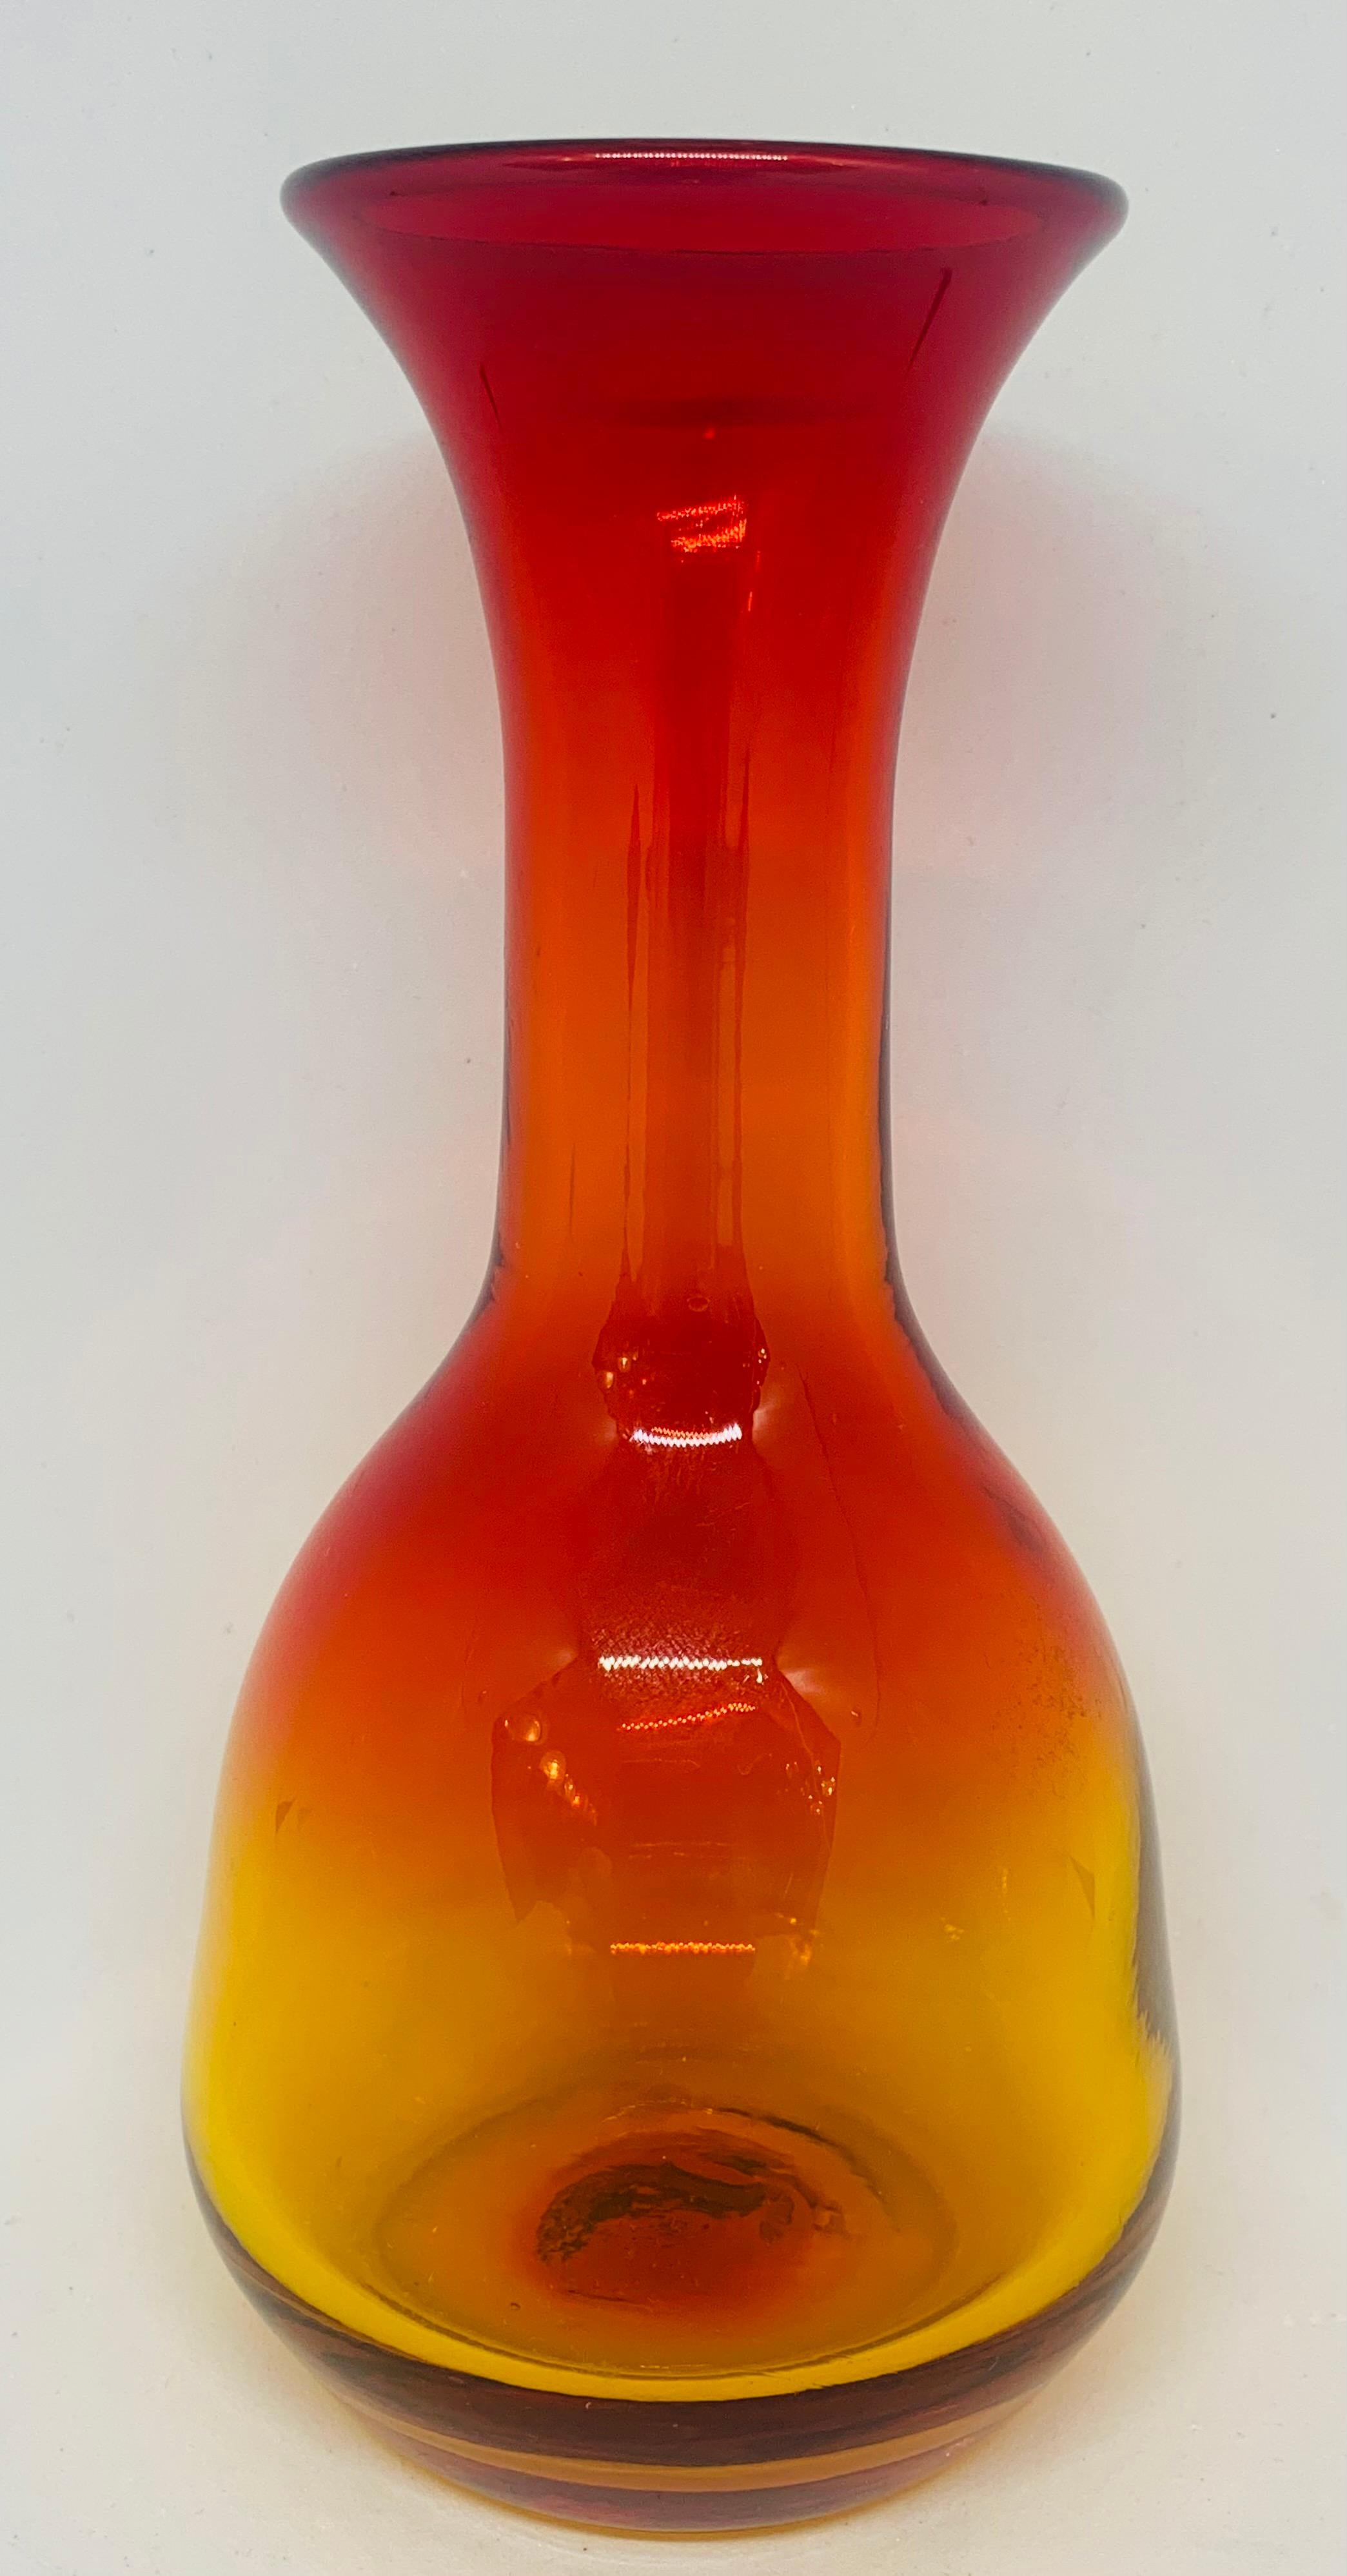 A small 1960s Blenko style hand blown tangerine or amberina glass vase. I am sure it's Blenko but with no manufacturer's label I can't be 100% certain. In very good vintage condition. Made in the USA. 

Dimensions: Diameter: 9cm, height: 17 1/2cm.